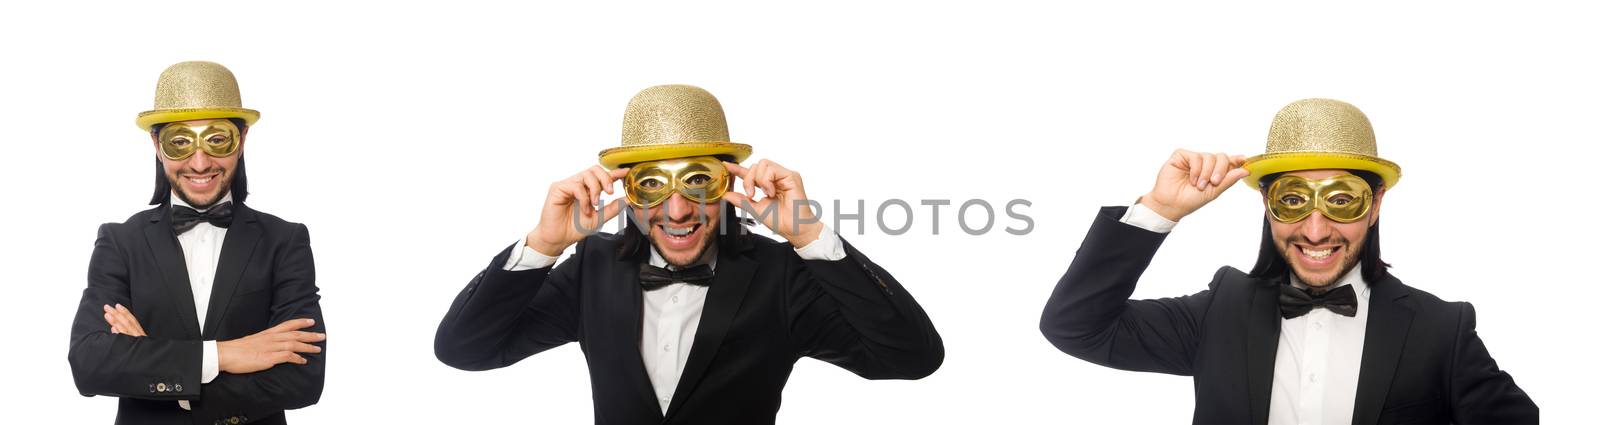 Funny man wearing mask isolated on white